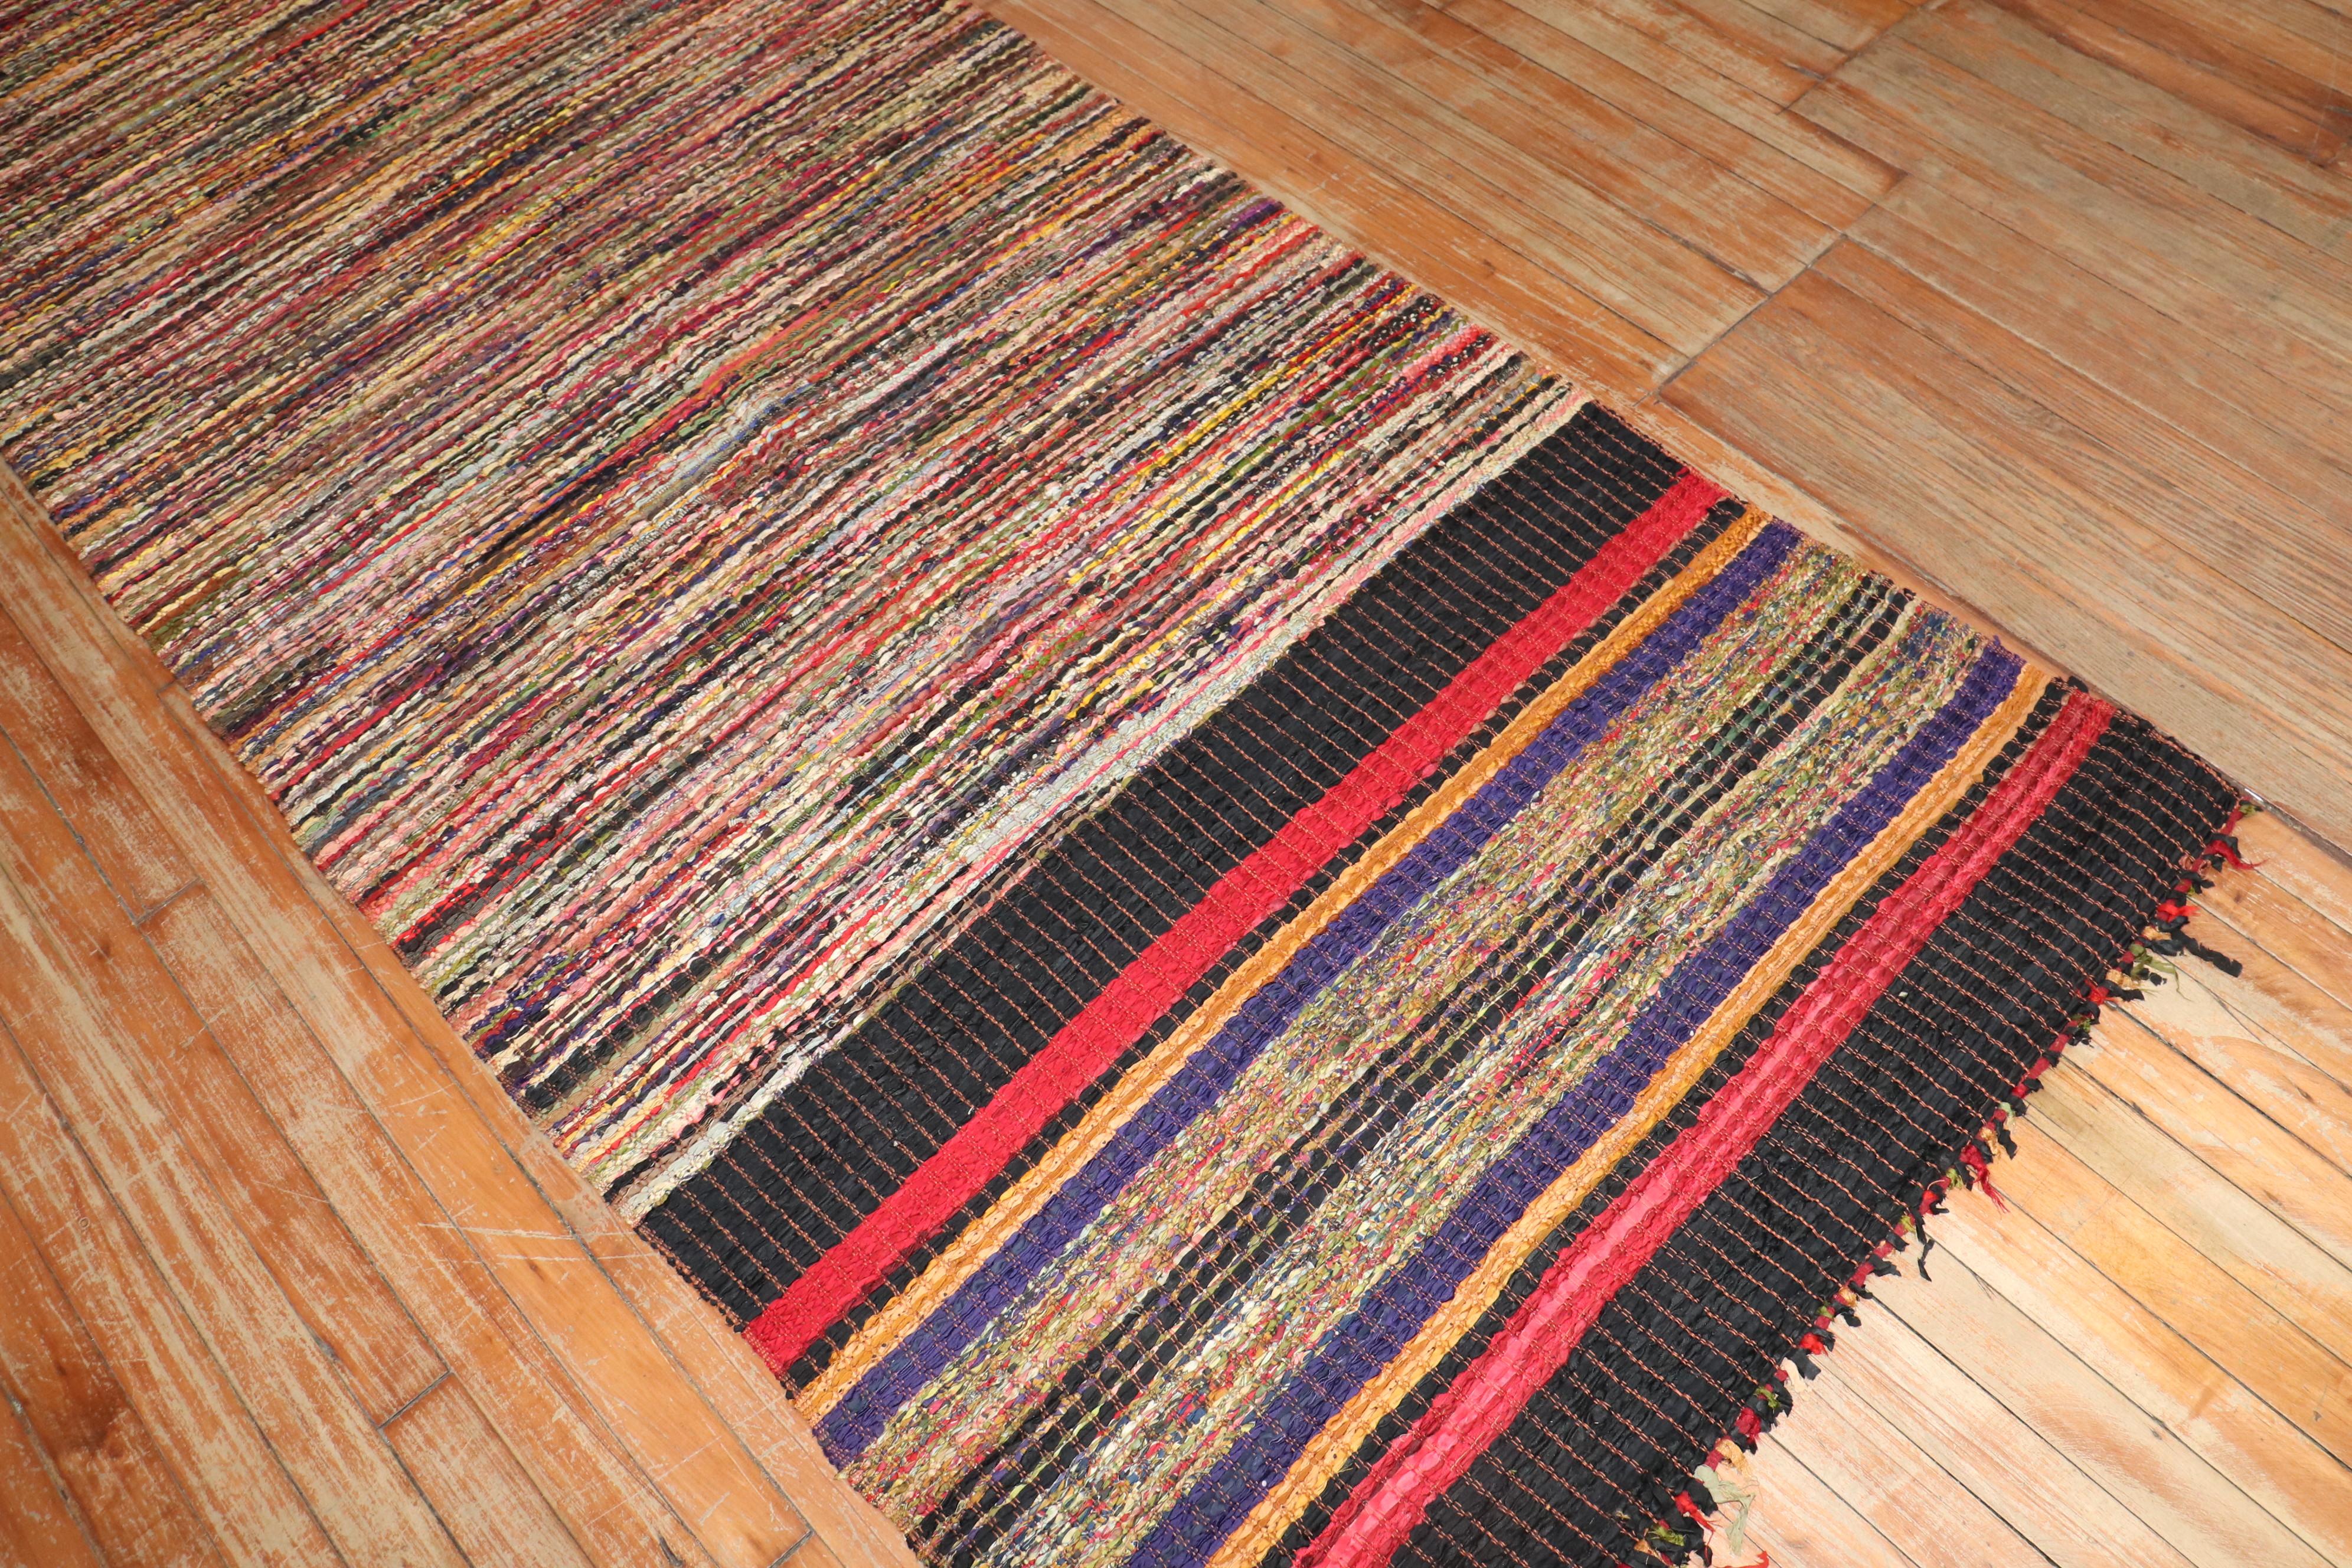 United States, Early 20th Century

A rare silk and wool American Rag rug Runne with a polychrome striated line pattern overall

Measures: 3'4'' x 9'4''.